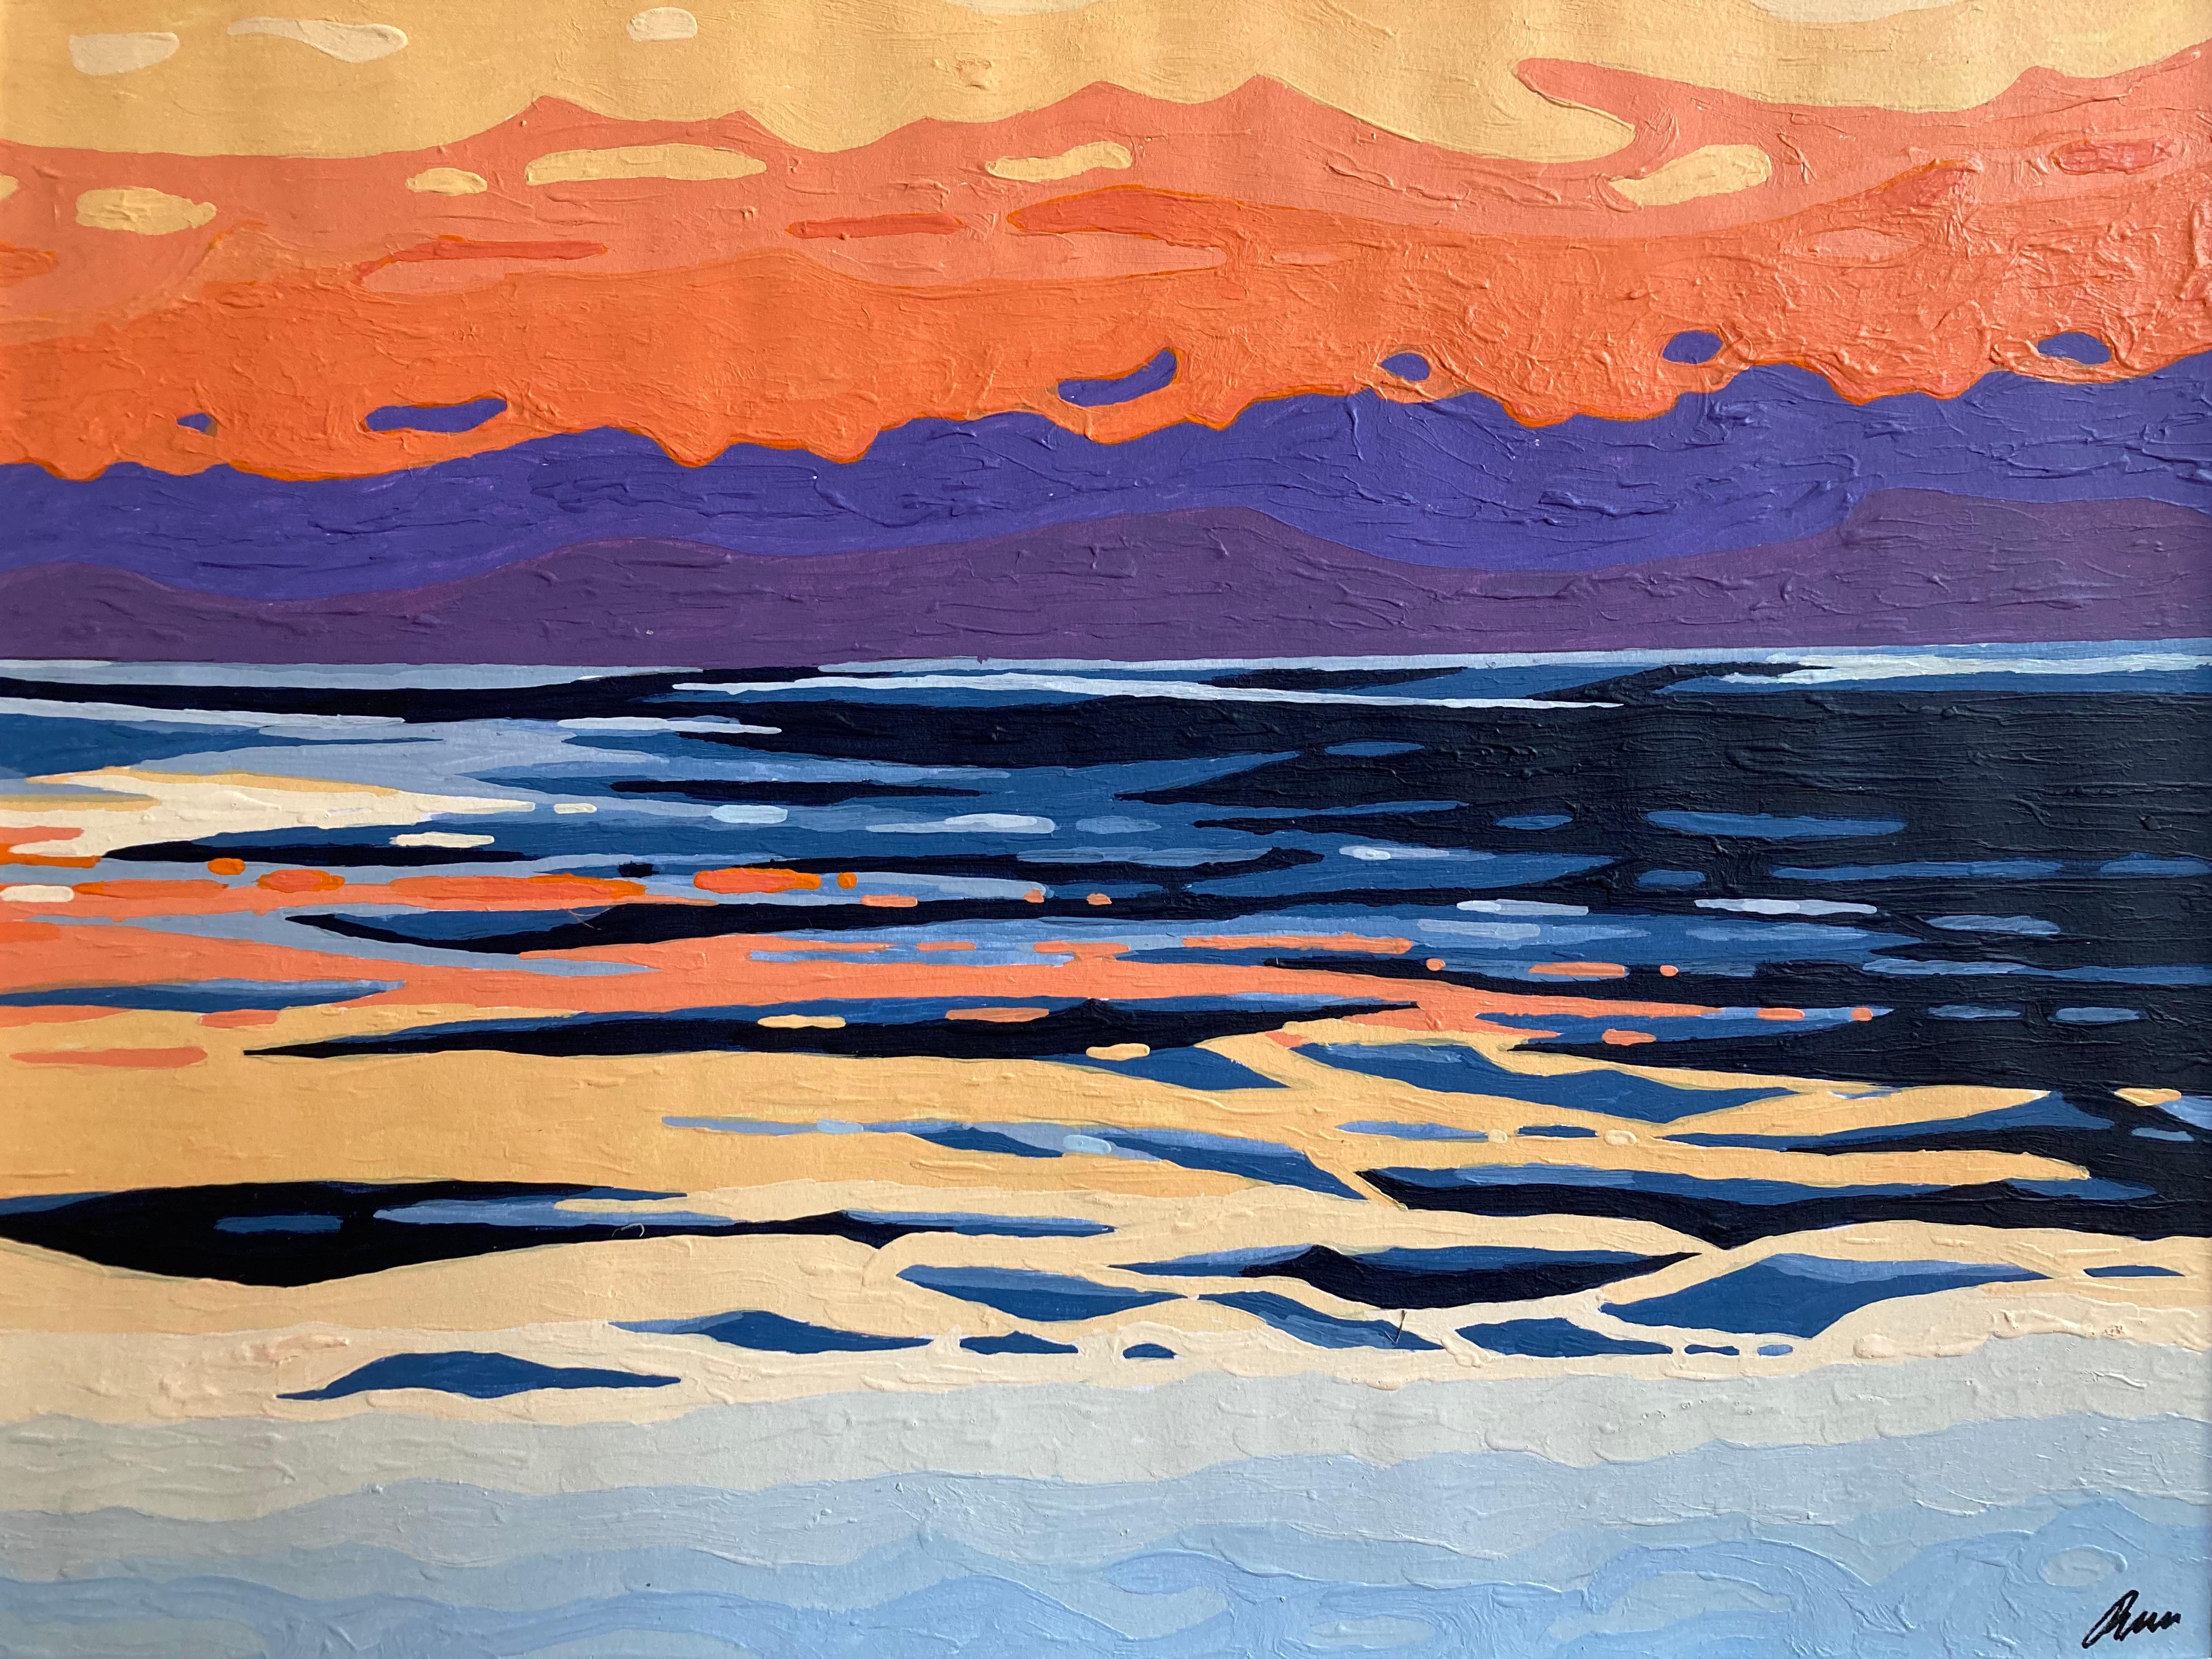 Cape Cod Sunset II
18.0 x 12.0 x 0.5, 0.5 lbs 
Acrylic 
Hand signed by artist 

Artist's Commentary: 
"Another beautiful sunset at Cape Cod. This image has a very wide palette of colors including purples, oranges and various tones of blue. It was